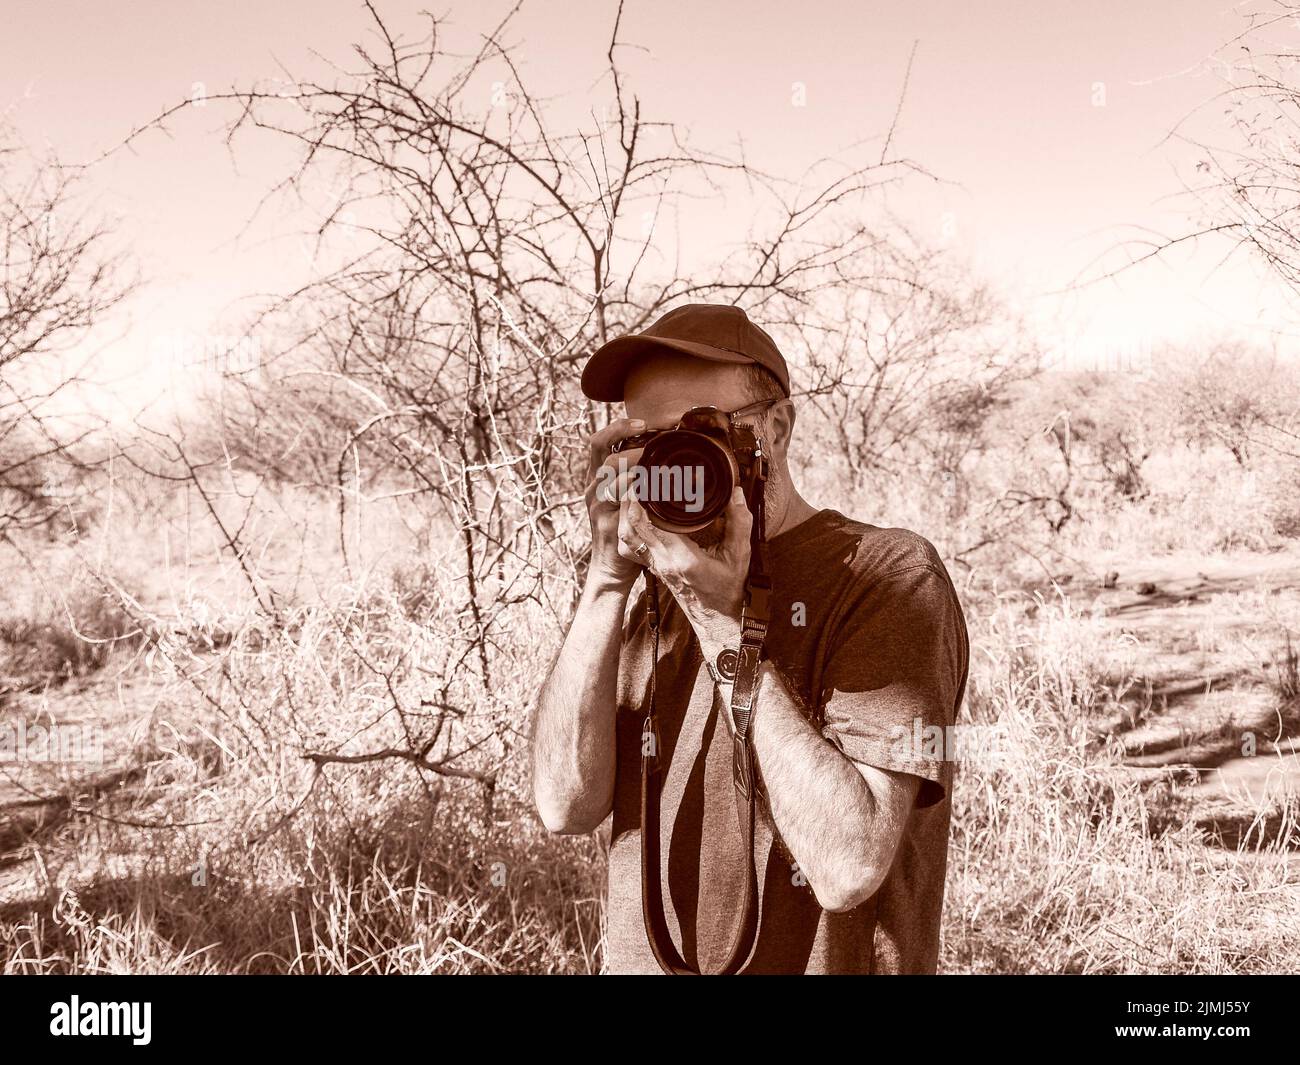 South Africa - August 21 2007: Sepia toned unrecognizable man wearing cap holding camera to his eye Stock Photo